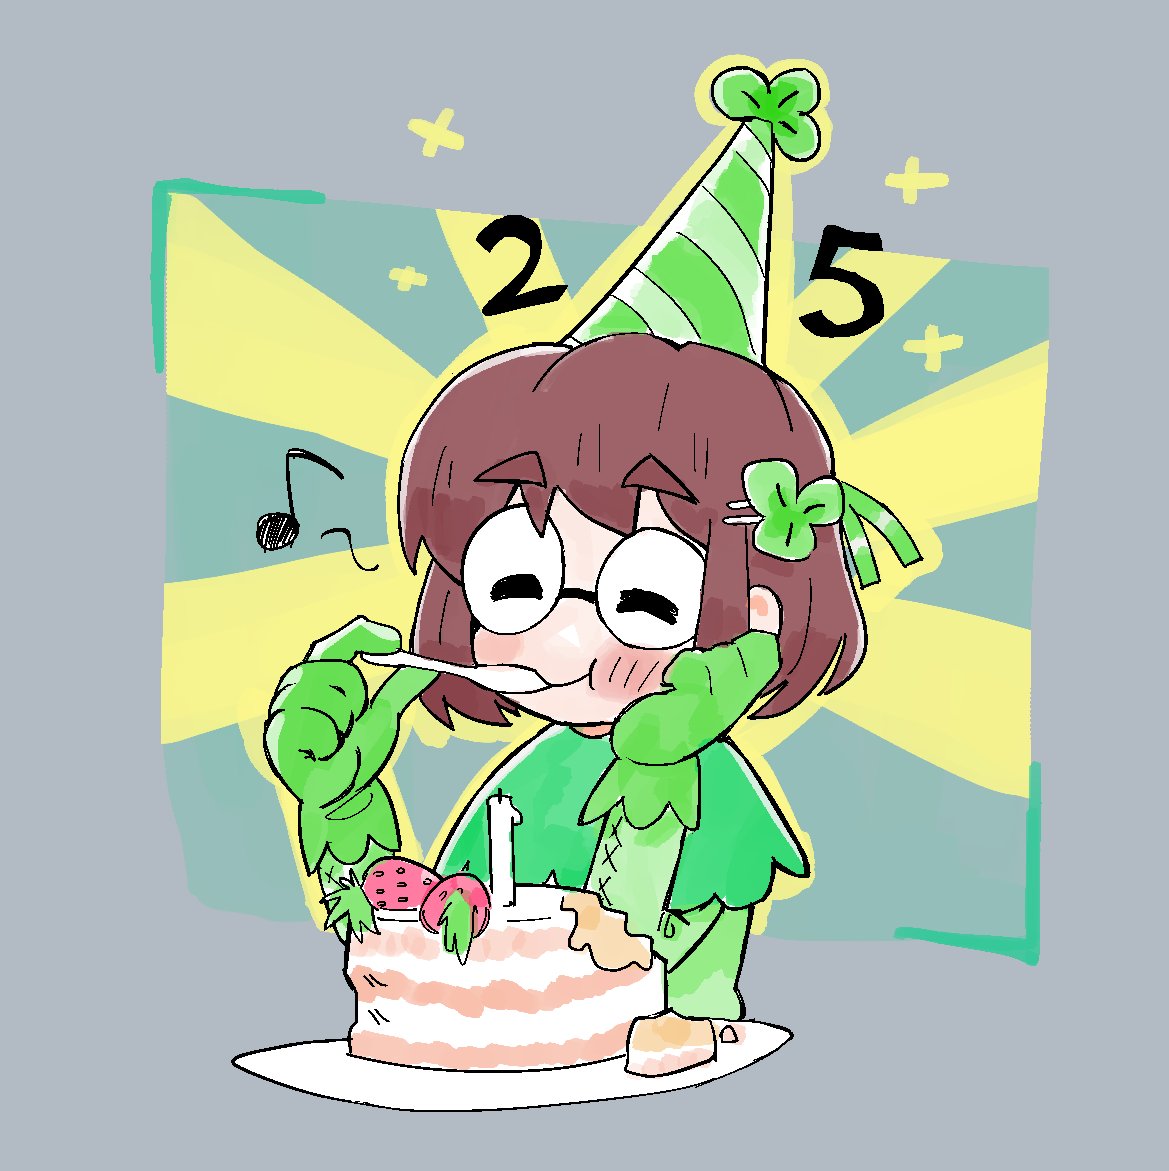 「a little late but, happy birthday! 」|1Her0のイラスト